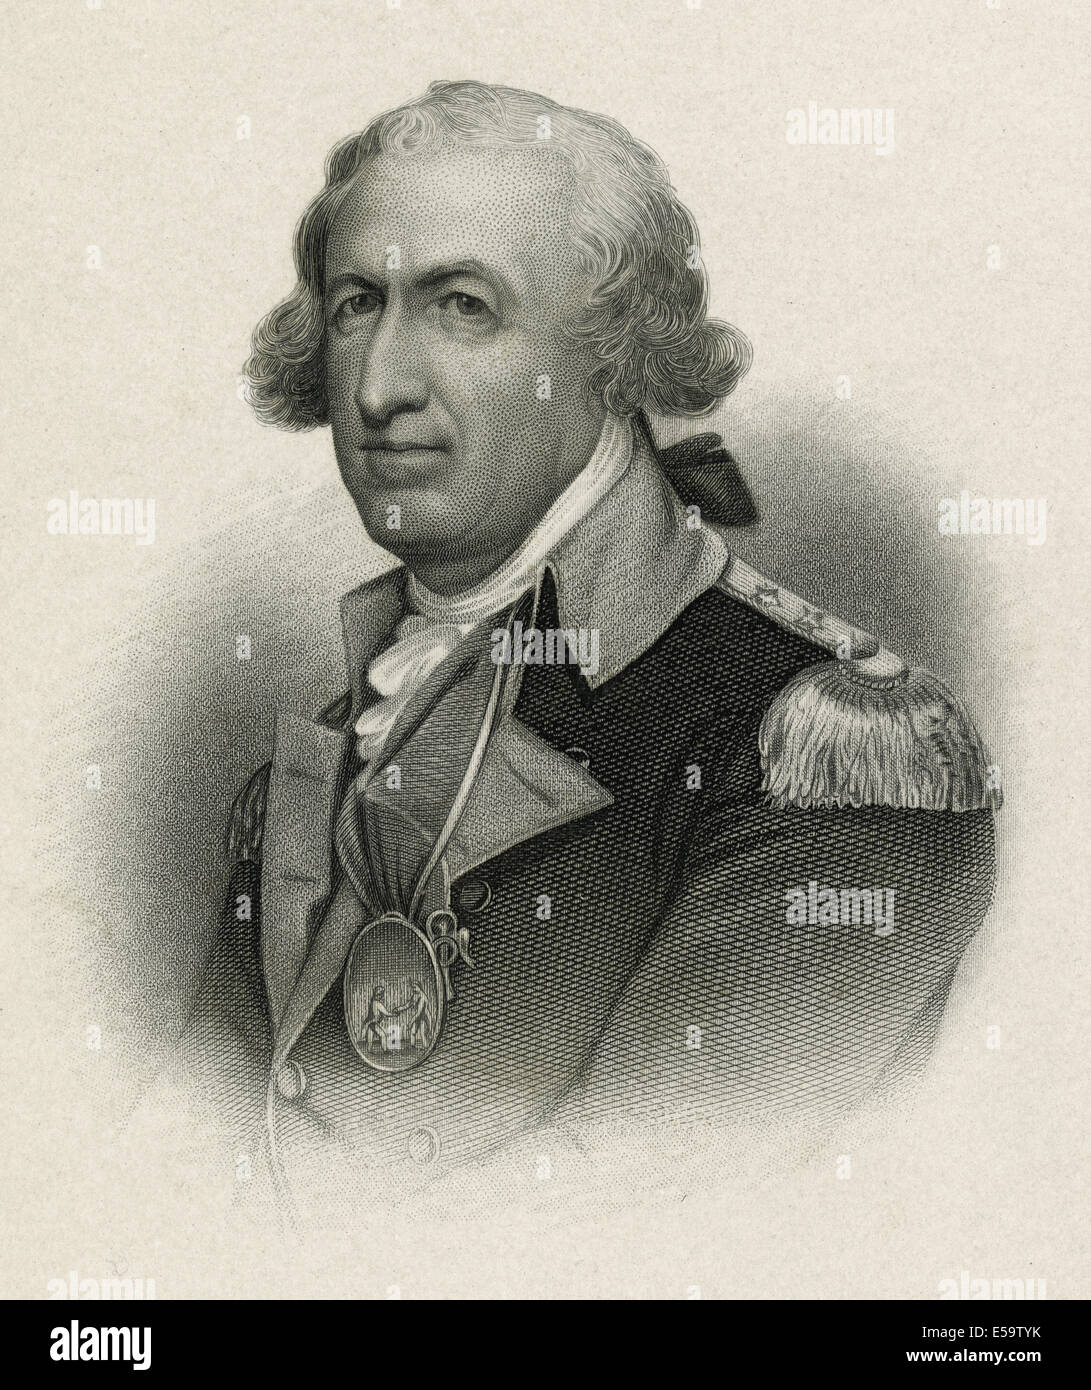 Antique engraving, circa 1860, of Horatio Gates. SOURCE: ORIGINAL FIRST GENERATION STEEL PLATE ENGRAVING. Stock Photo